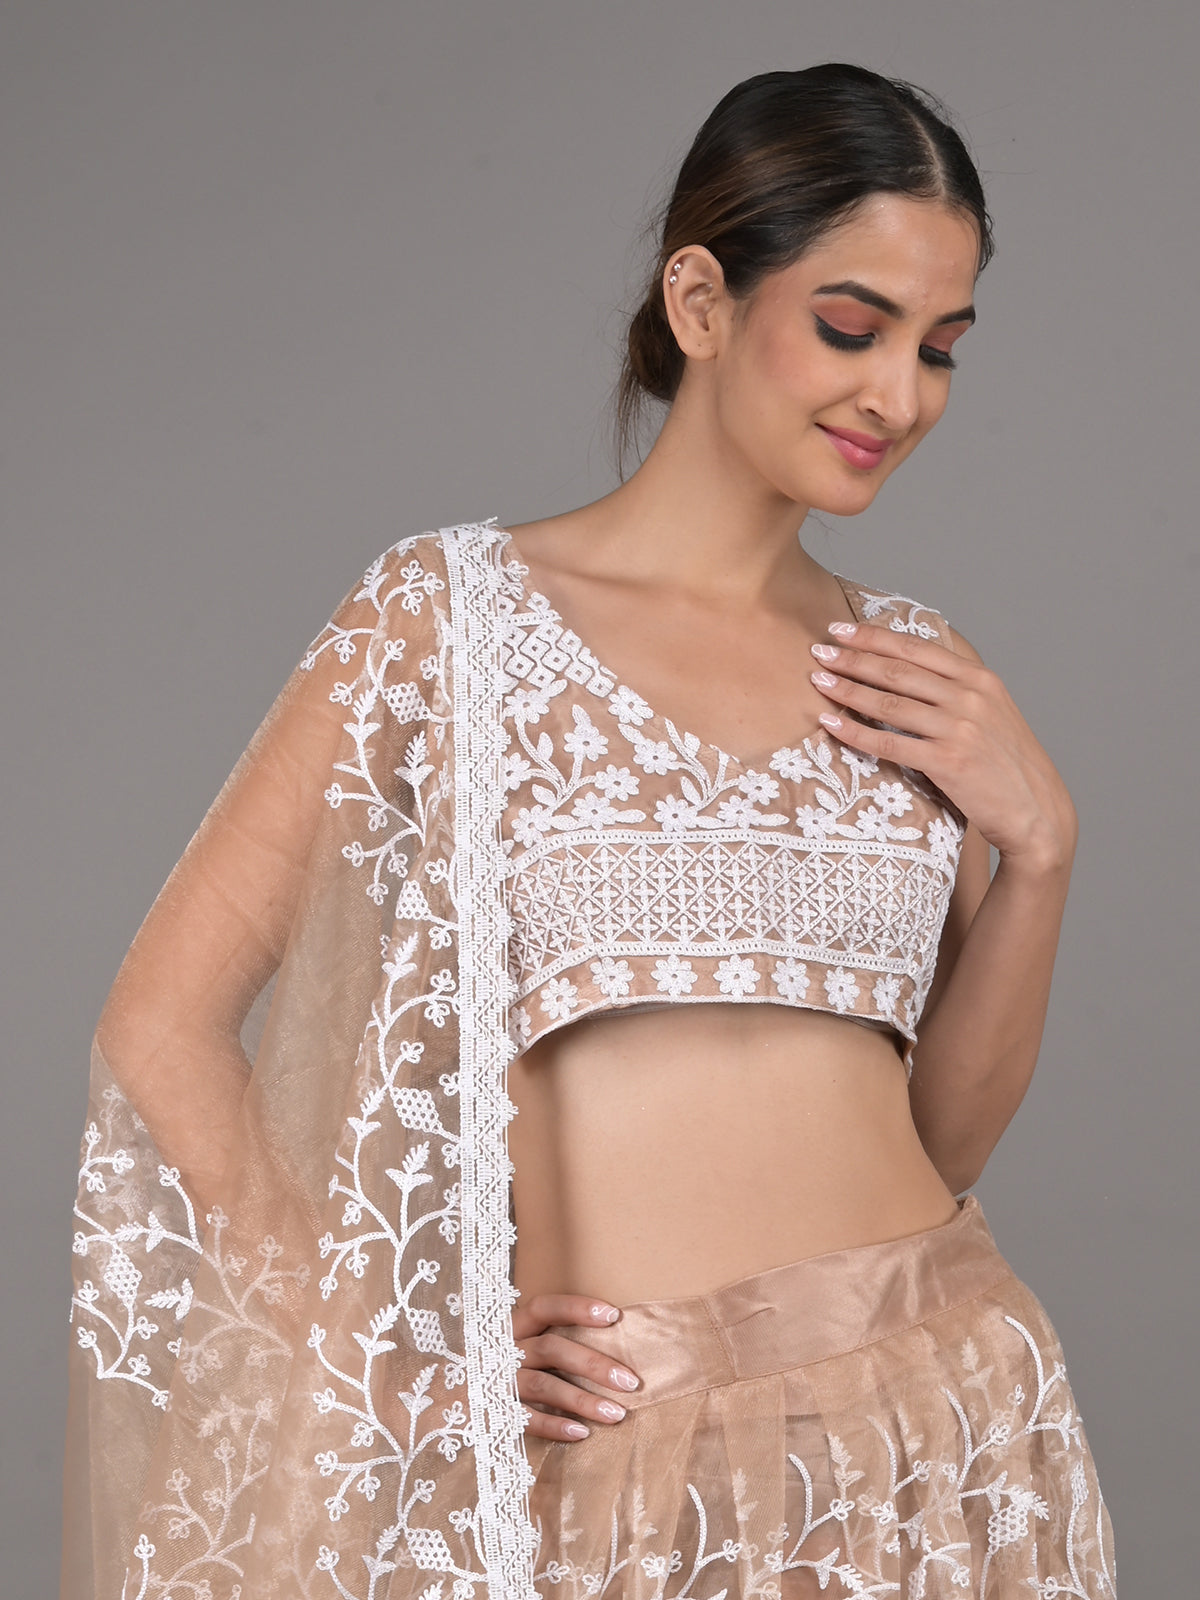 Odette Beige Embroidered Stitched Net Lehenga Set For Women